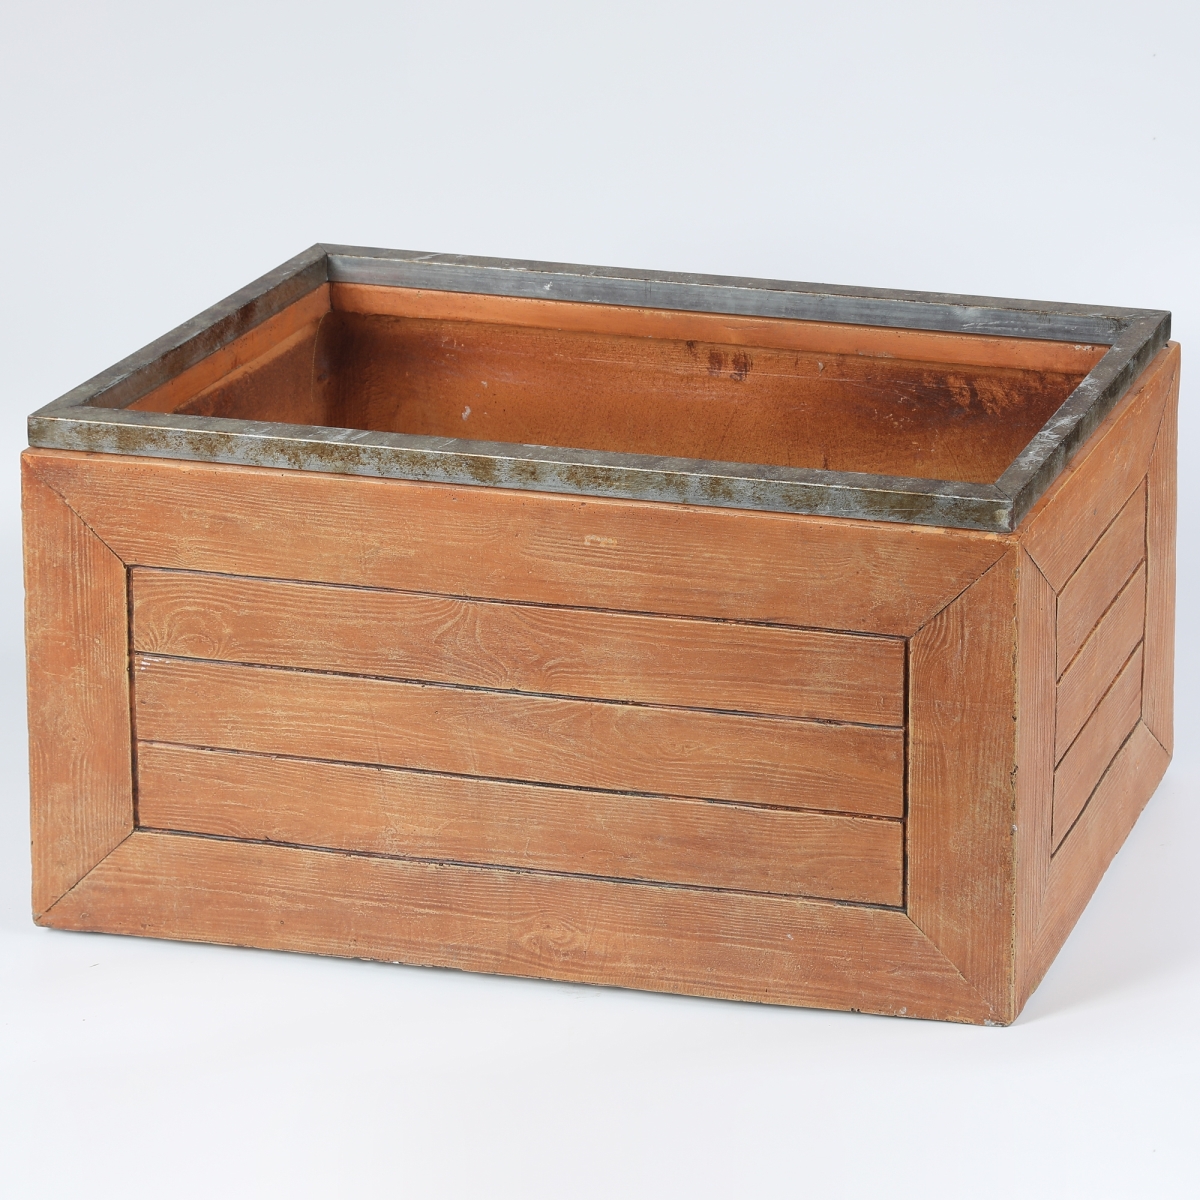 Whpl714 13 In. Rectangular Mgo Fiberclay Crate Style Planter